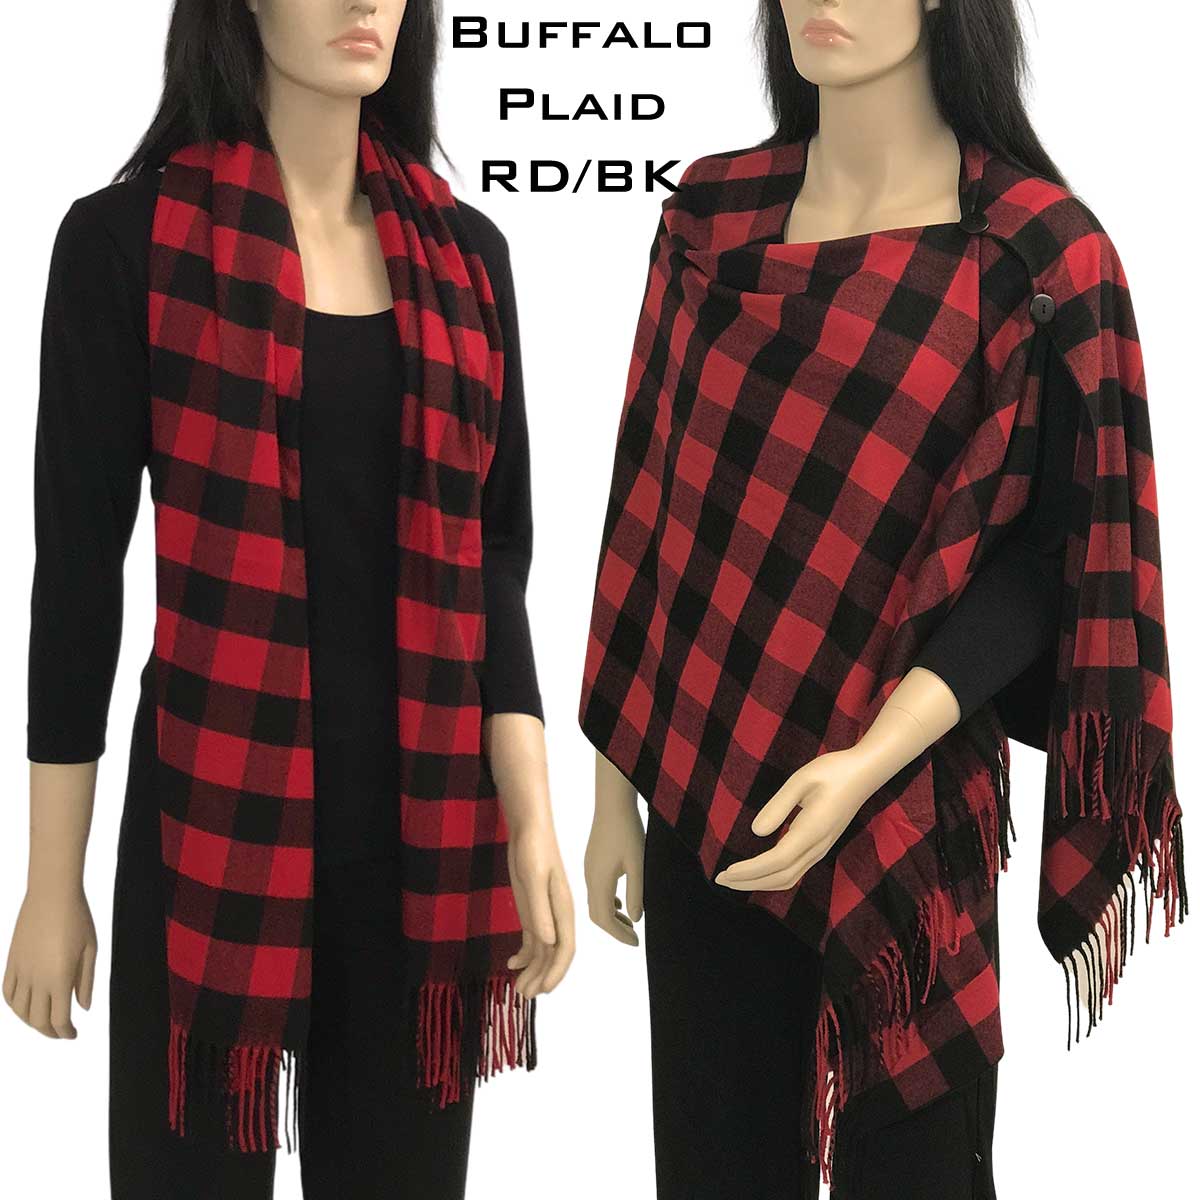 Matching Pieces for Autumn and Winter 3178 3306 BUFFALO PLAID WHITE/BLACK with Black Buttons - One Size Fits All